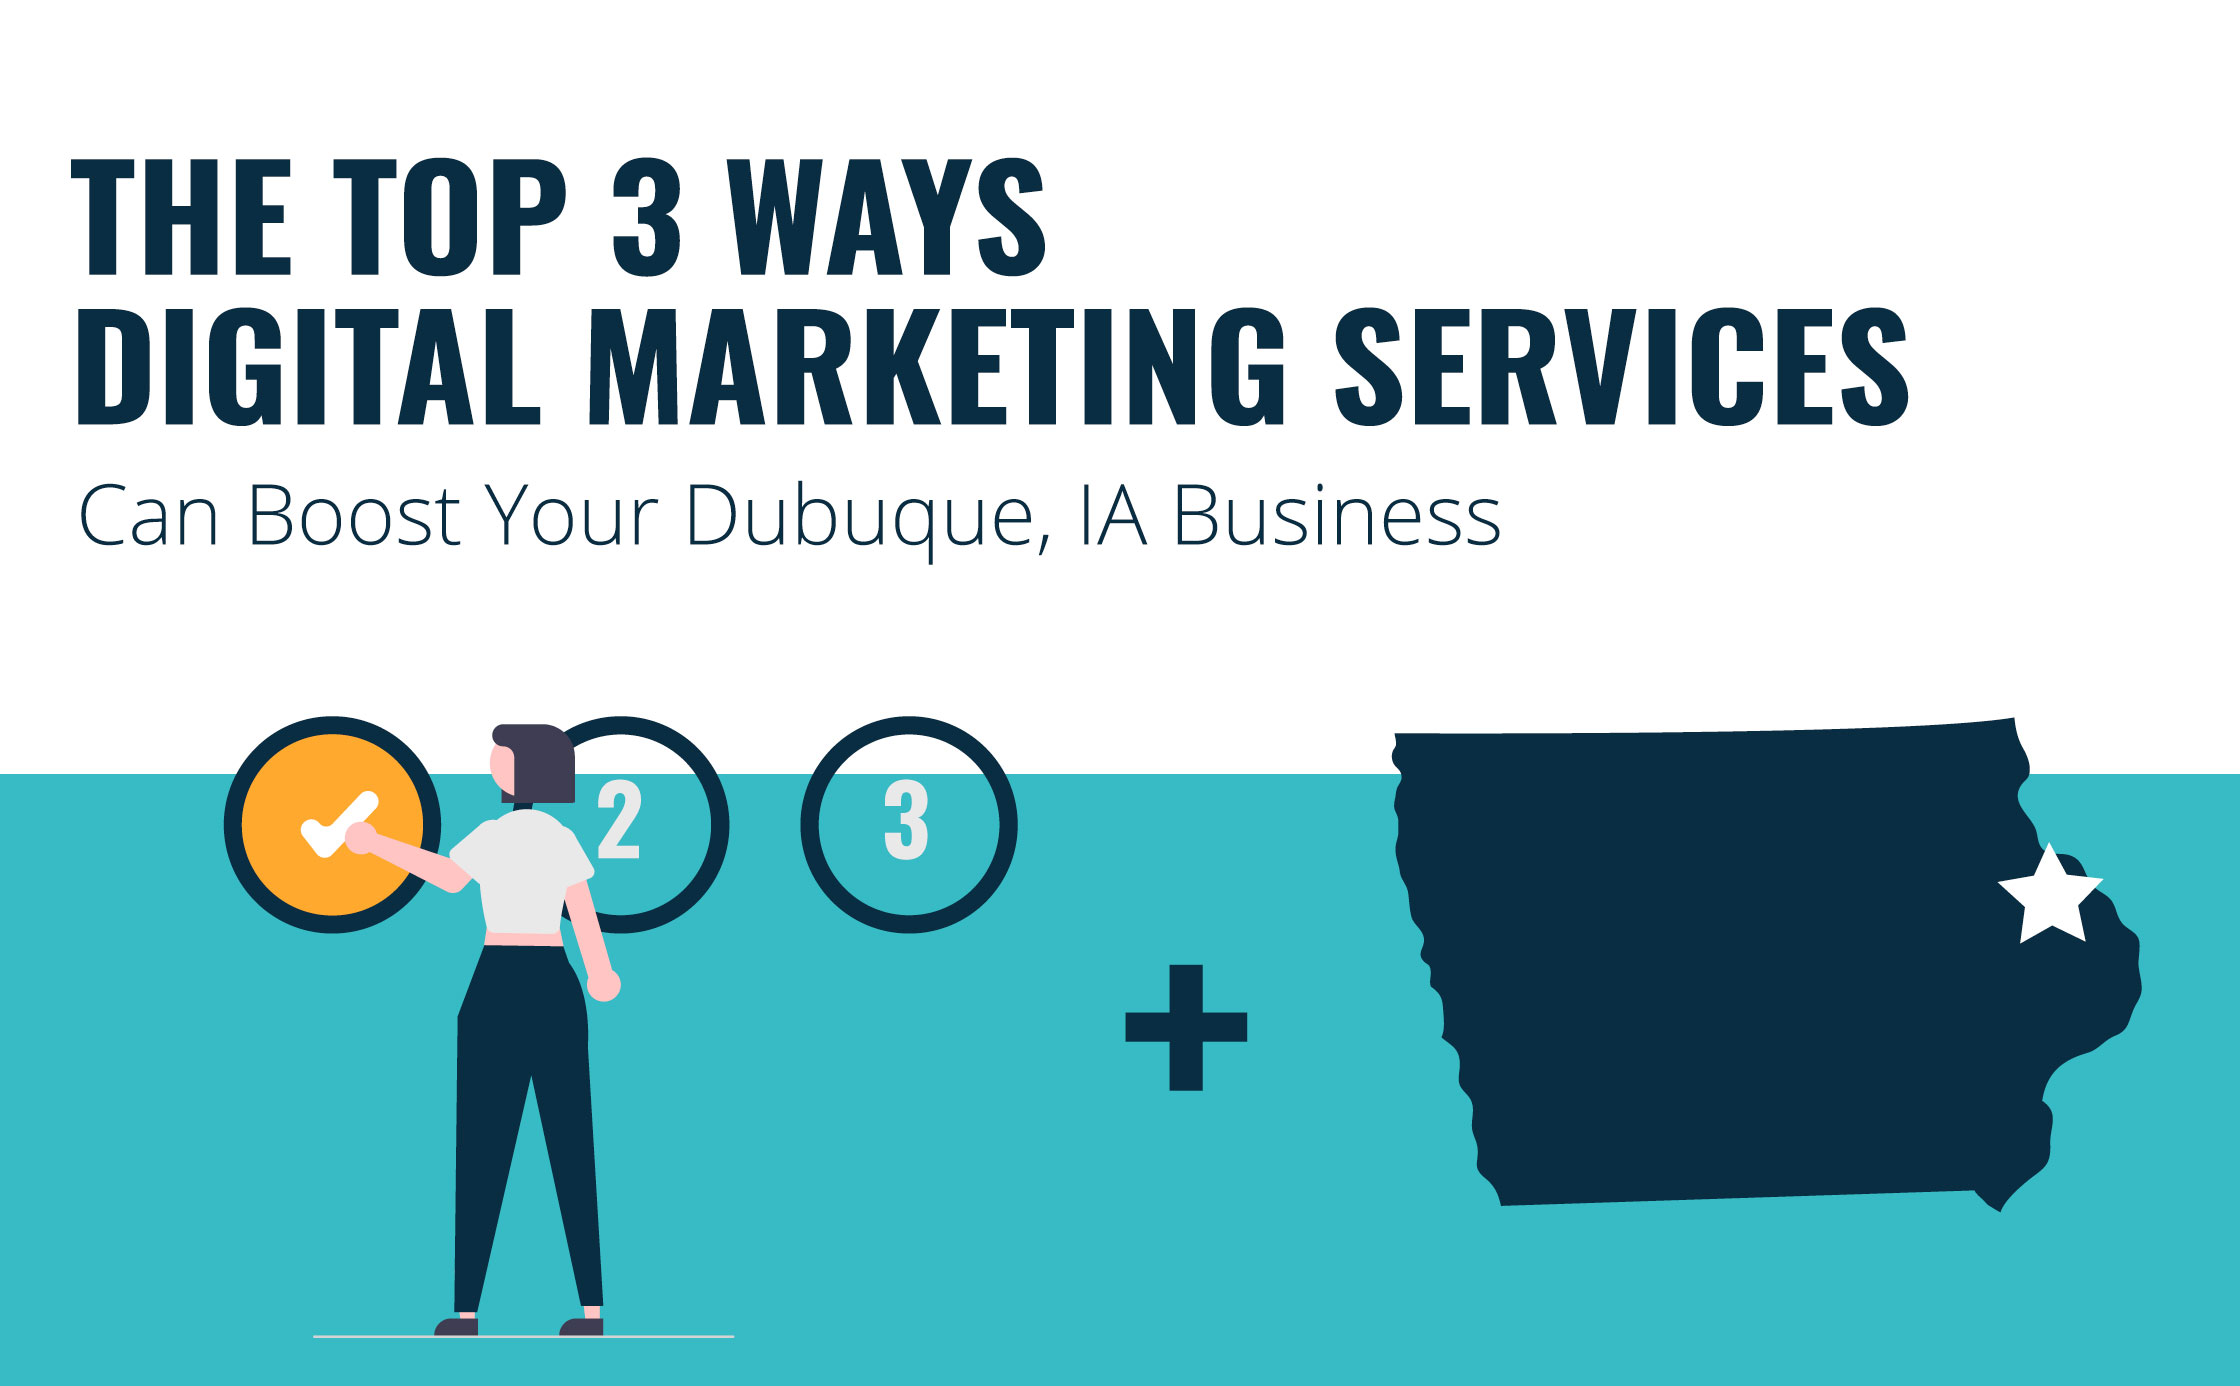 Top 3 Ways Digital Marketing Services Can Boost Your Dubuque, IA Business